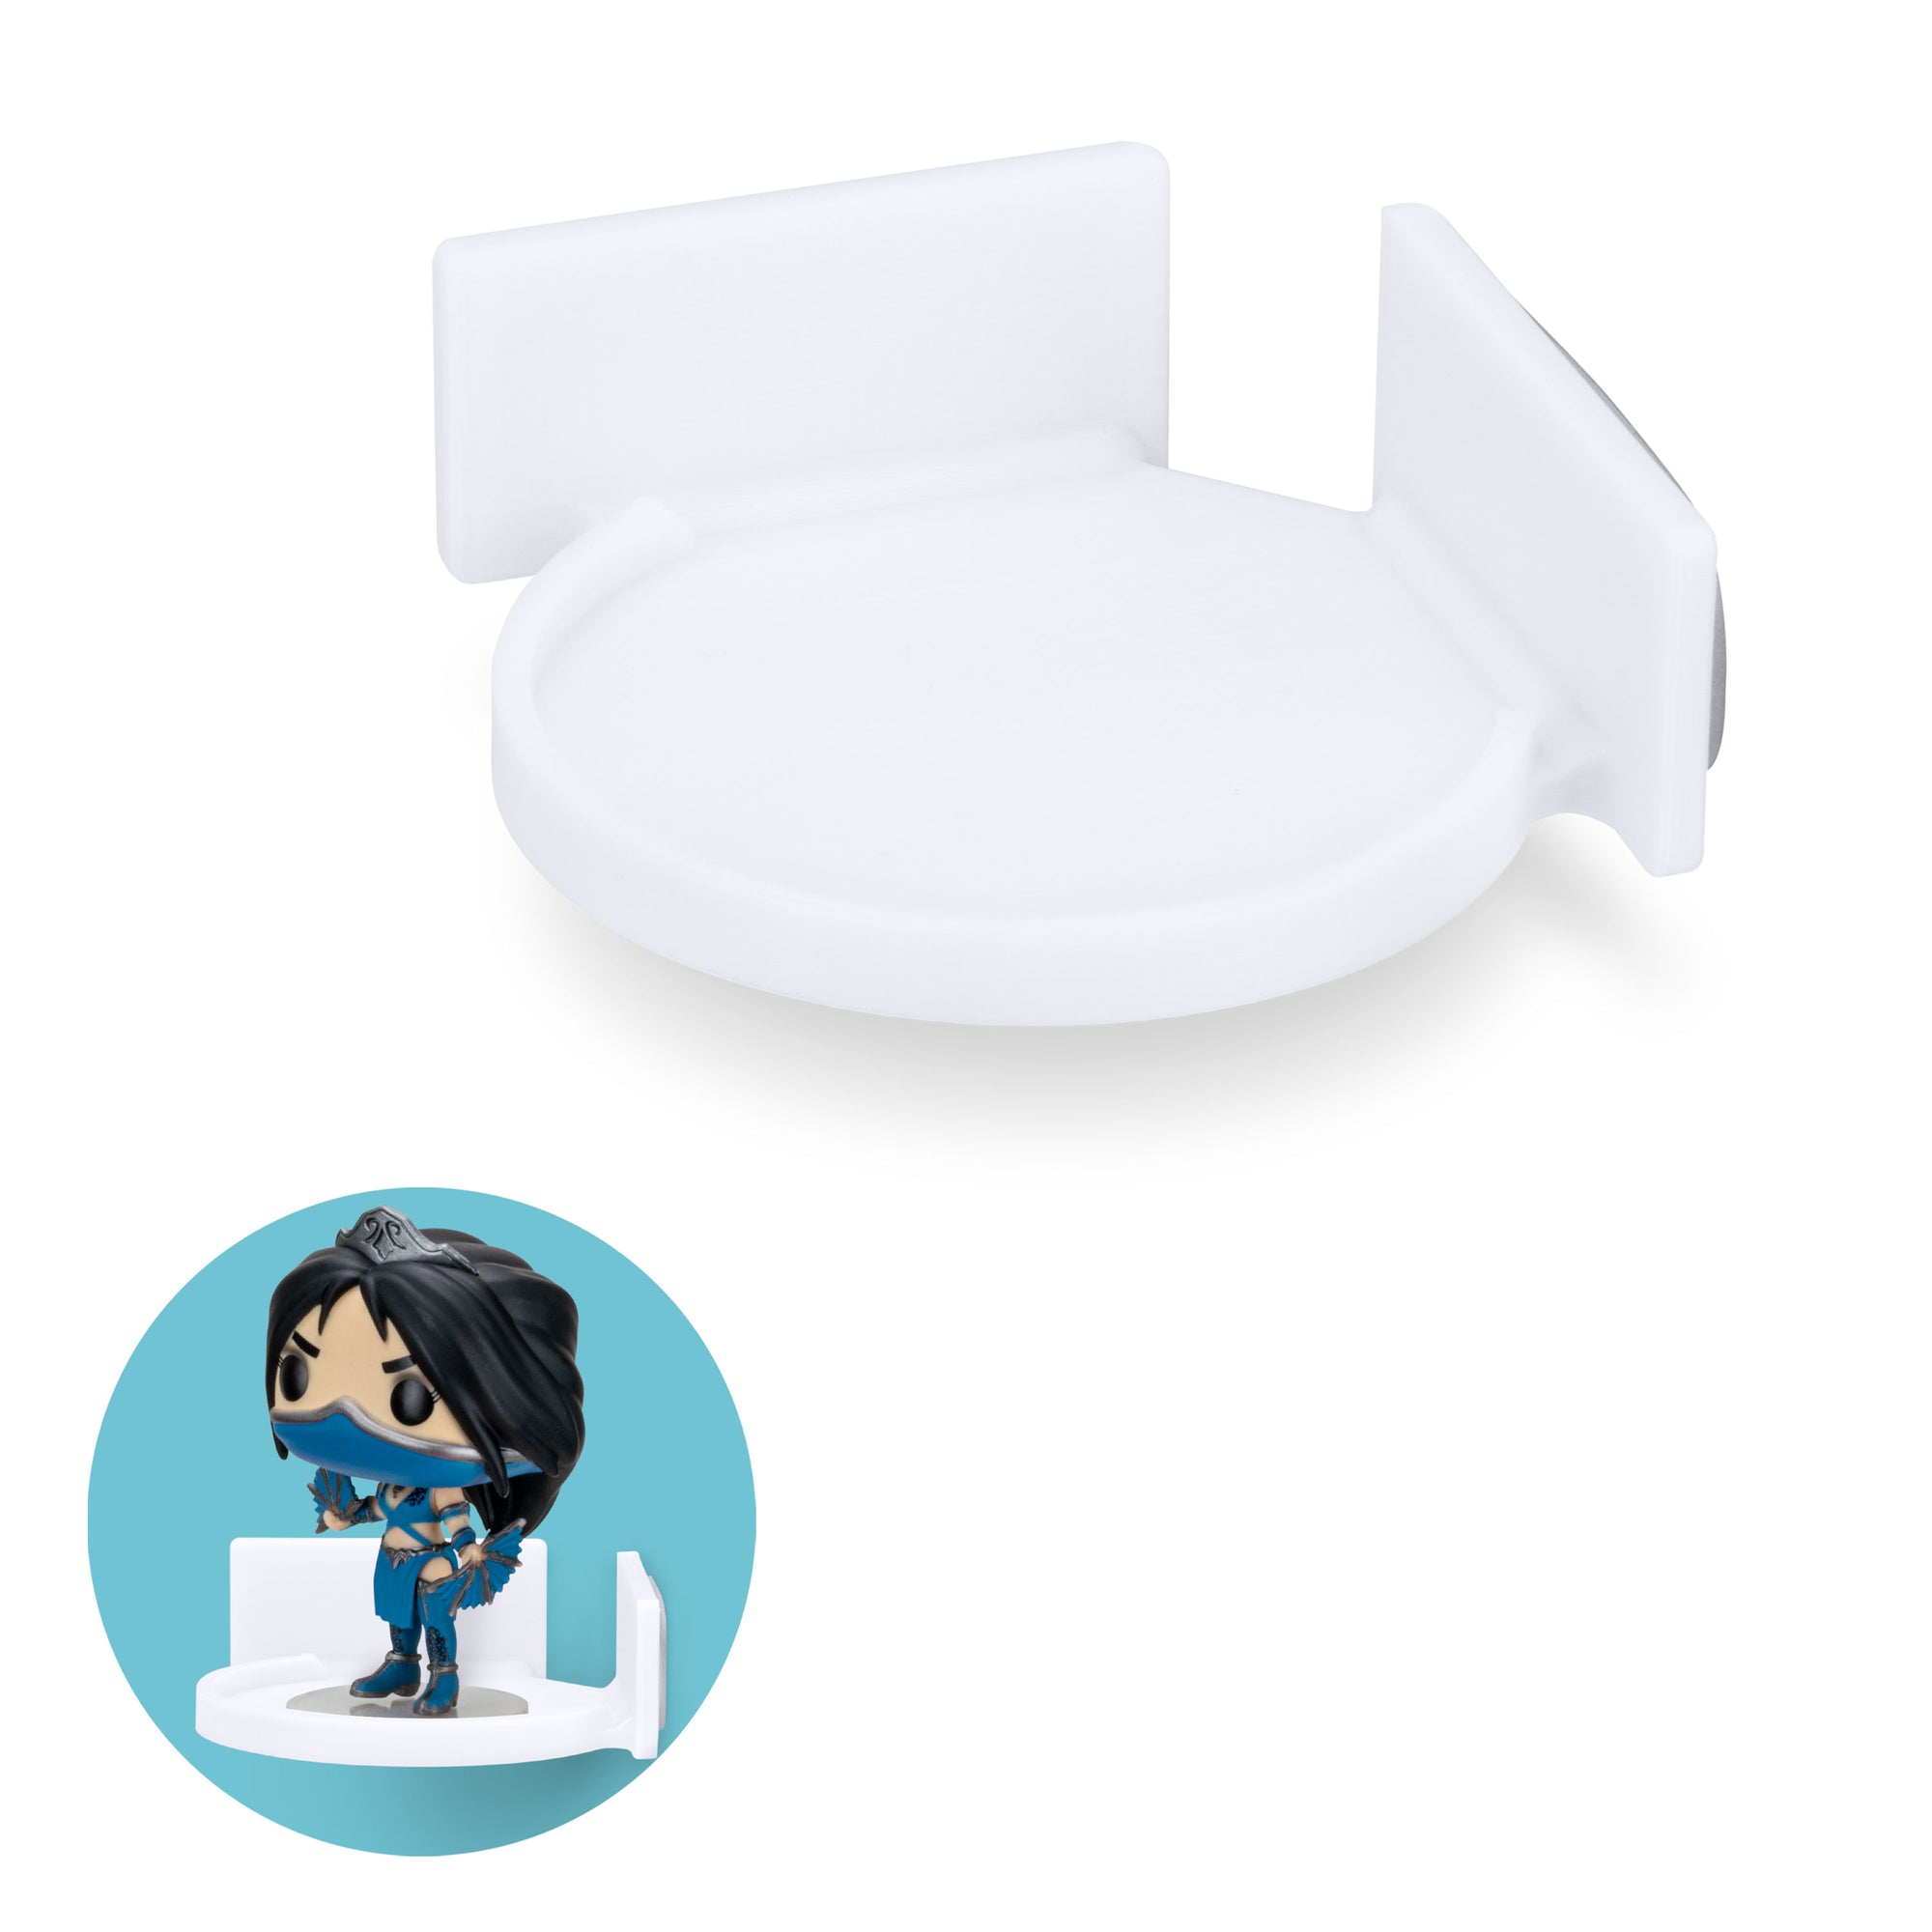 Adhesive Small Circular Corner Floating Shelf for Security Cameras, Baby Monitors, Speakers, Plants & More